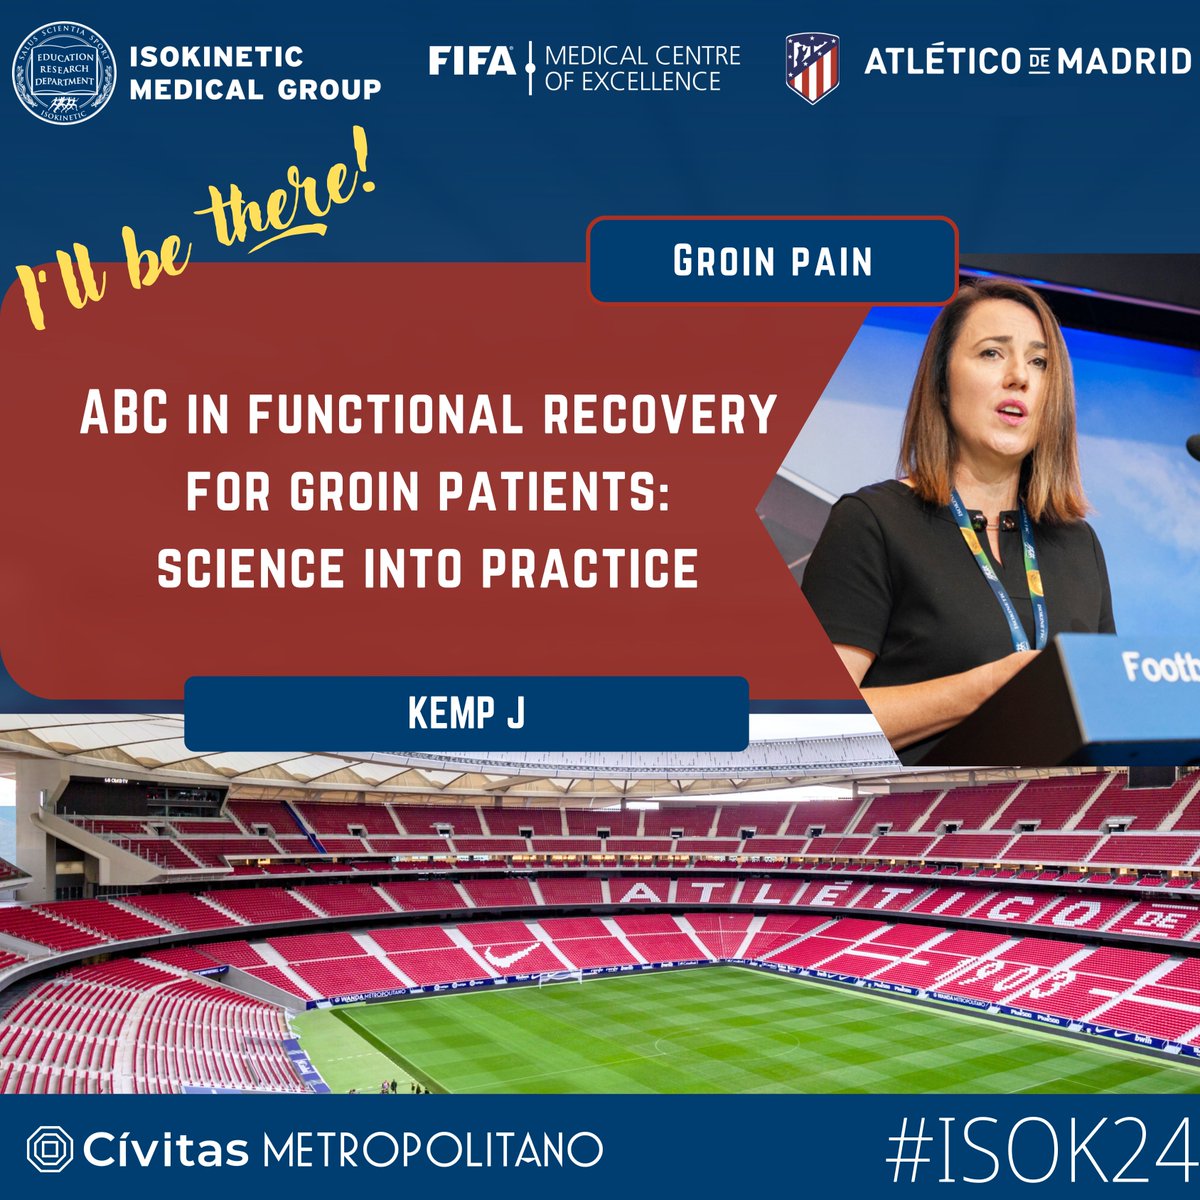 I am very excited to be going to Madrid in May! Hope to see you all there @footballmed @IsokineticMed